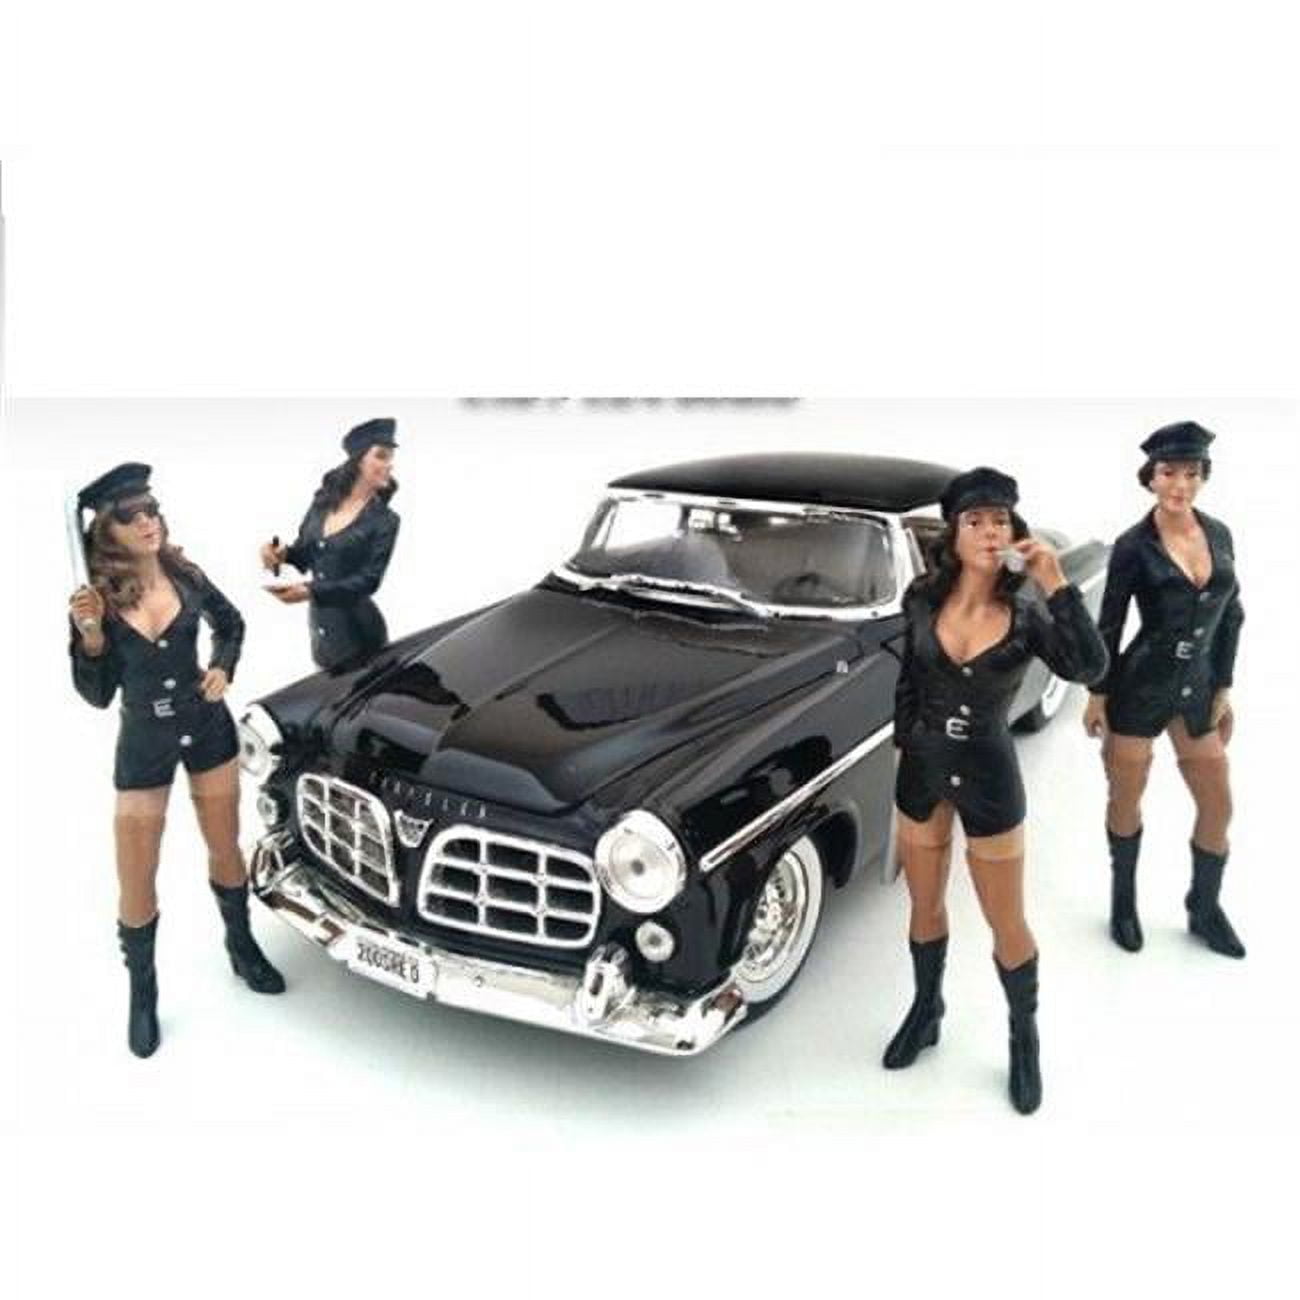 23917-23918-23919-23920 Costume Babes Figure Set For 1-24 Scale Models, 4 Piece